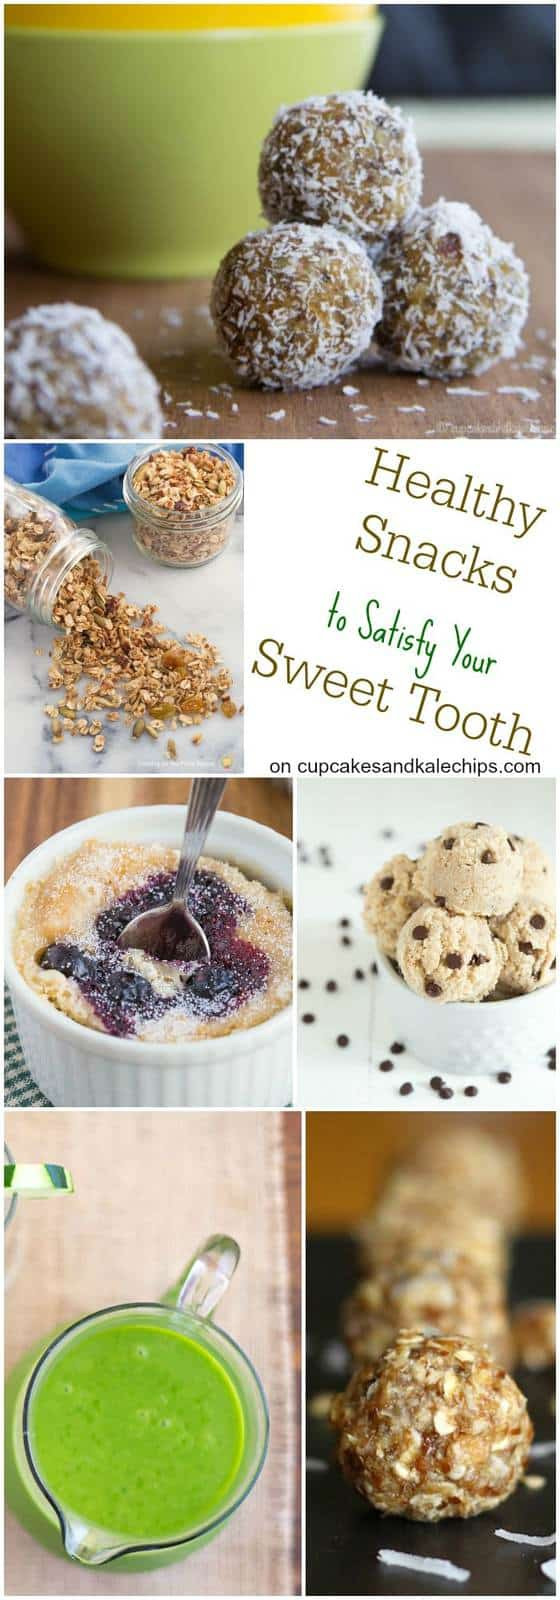 Sweet Snacks Recipes
 25 Healthy Snacks to Satisfy Your Sweet Tooth Cupcakes